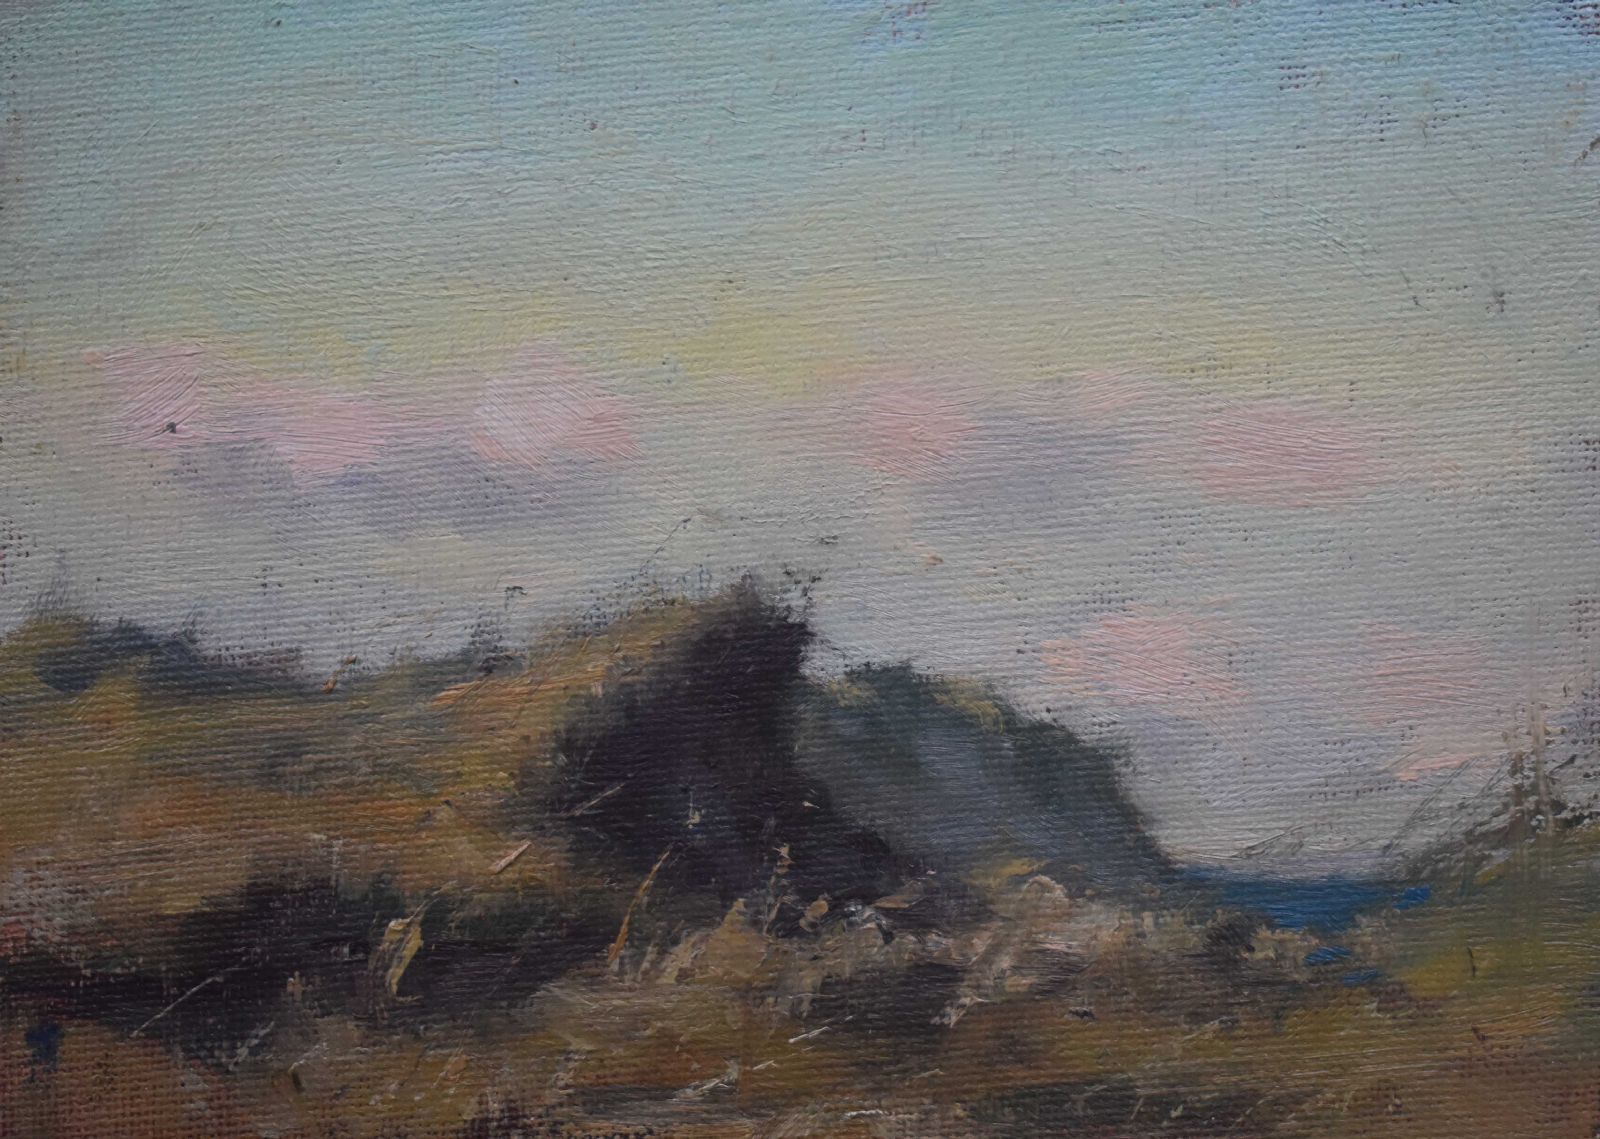  Dune Crepuscular (Inishmaan) by Dave West